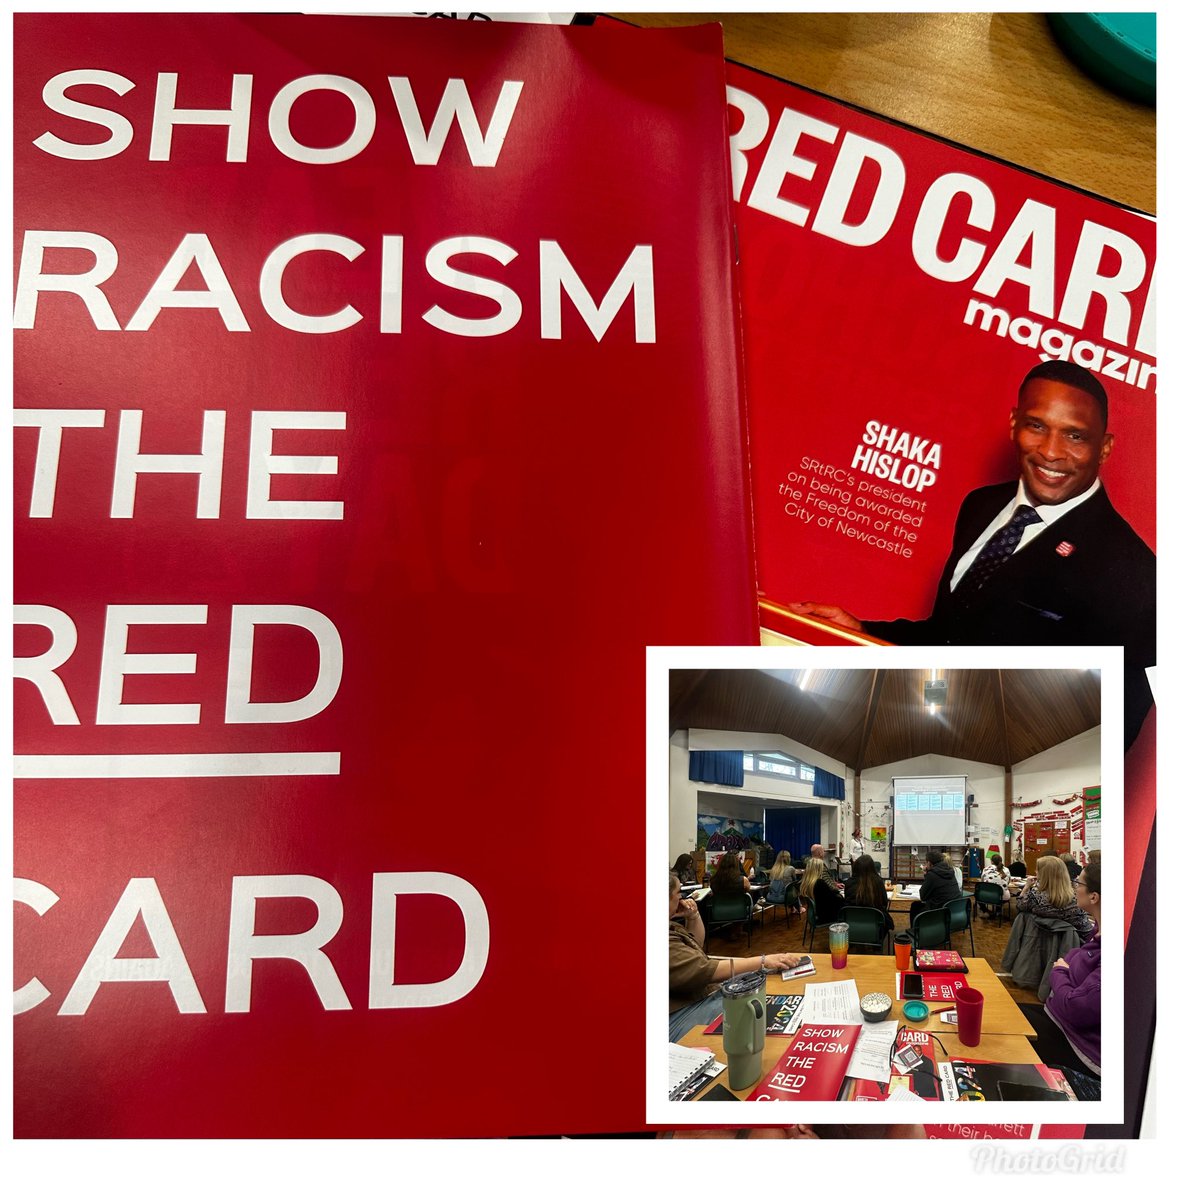 Excellent staff training this morning with @theredcardwales #ShowRacismtheRedCard